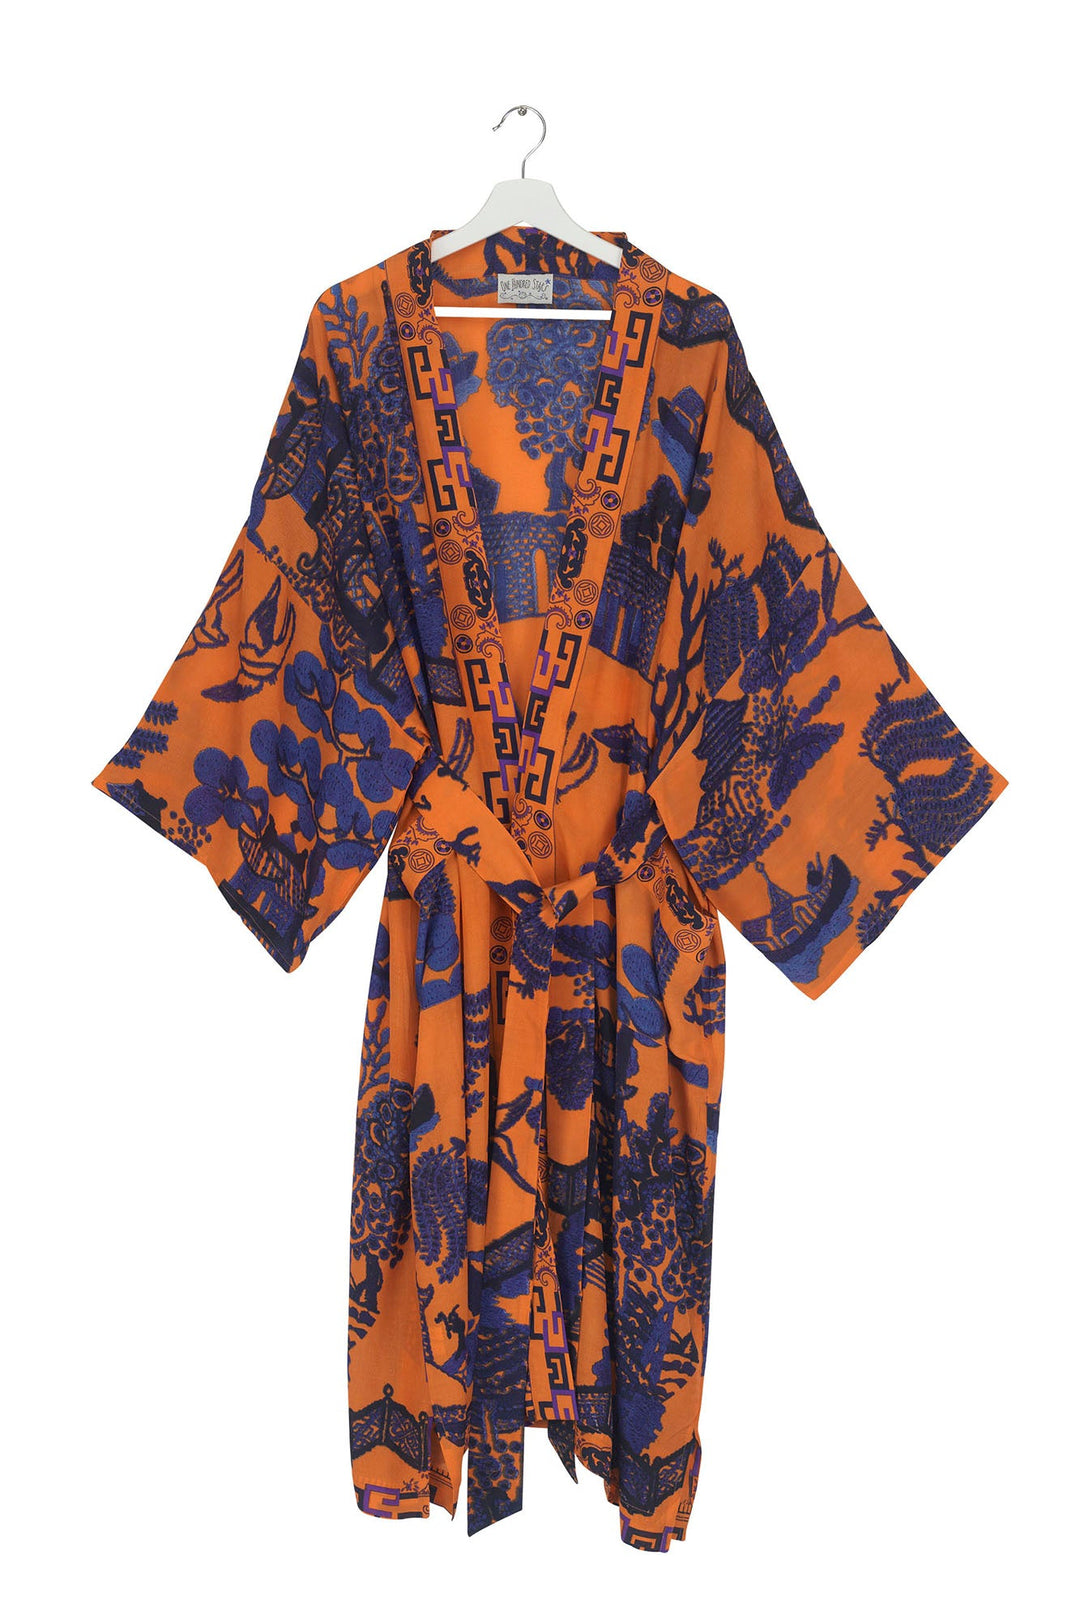 One Hundred Stars Giant Willow Orange Crepe Long Kimono- This kimono can be worn two ways, when tied at the back it makes a chic open fronted jacket. Alternatively, it can be worn tied at the front as a closed jacket or dress and secured using the interior waist tie. 